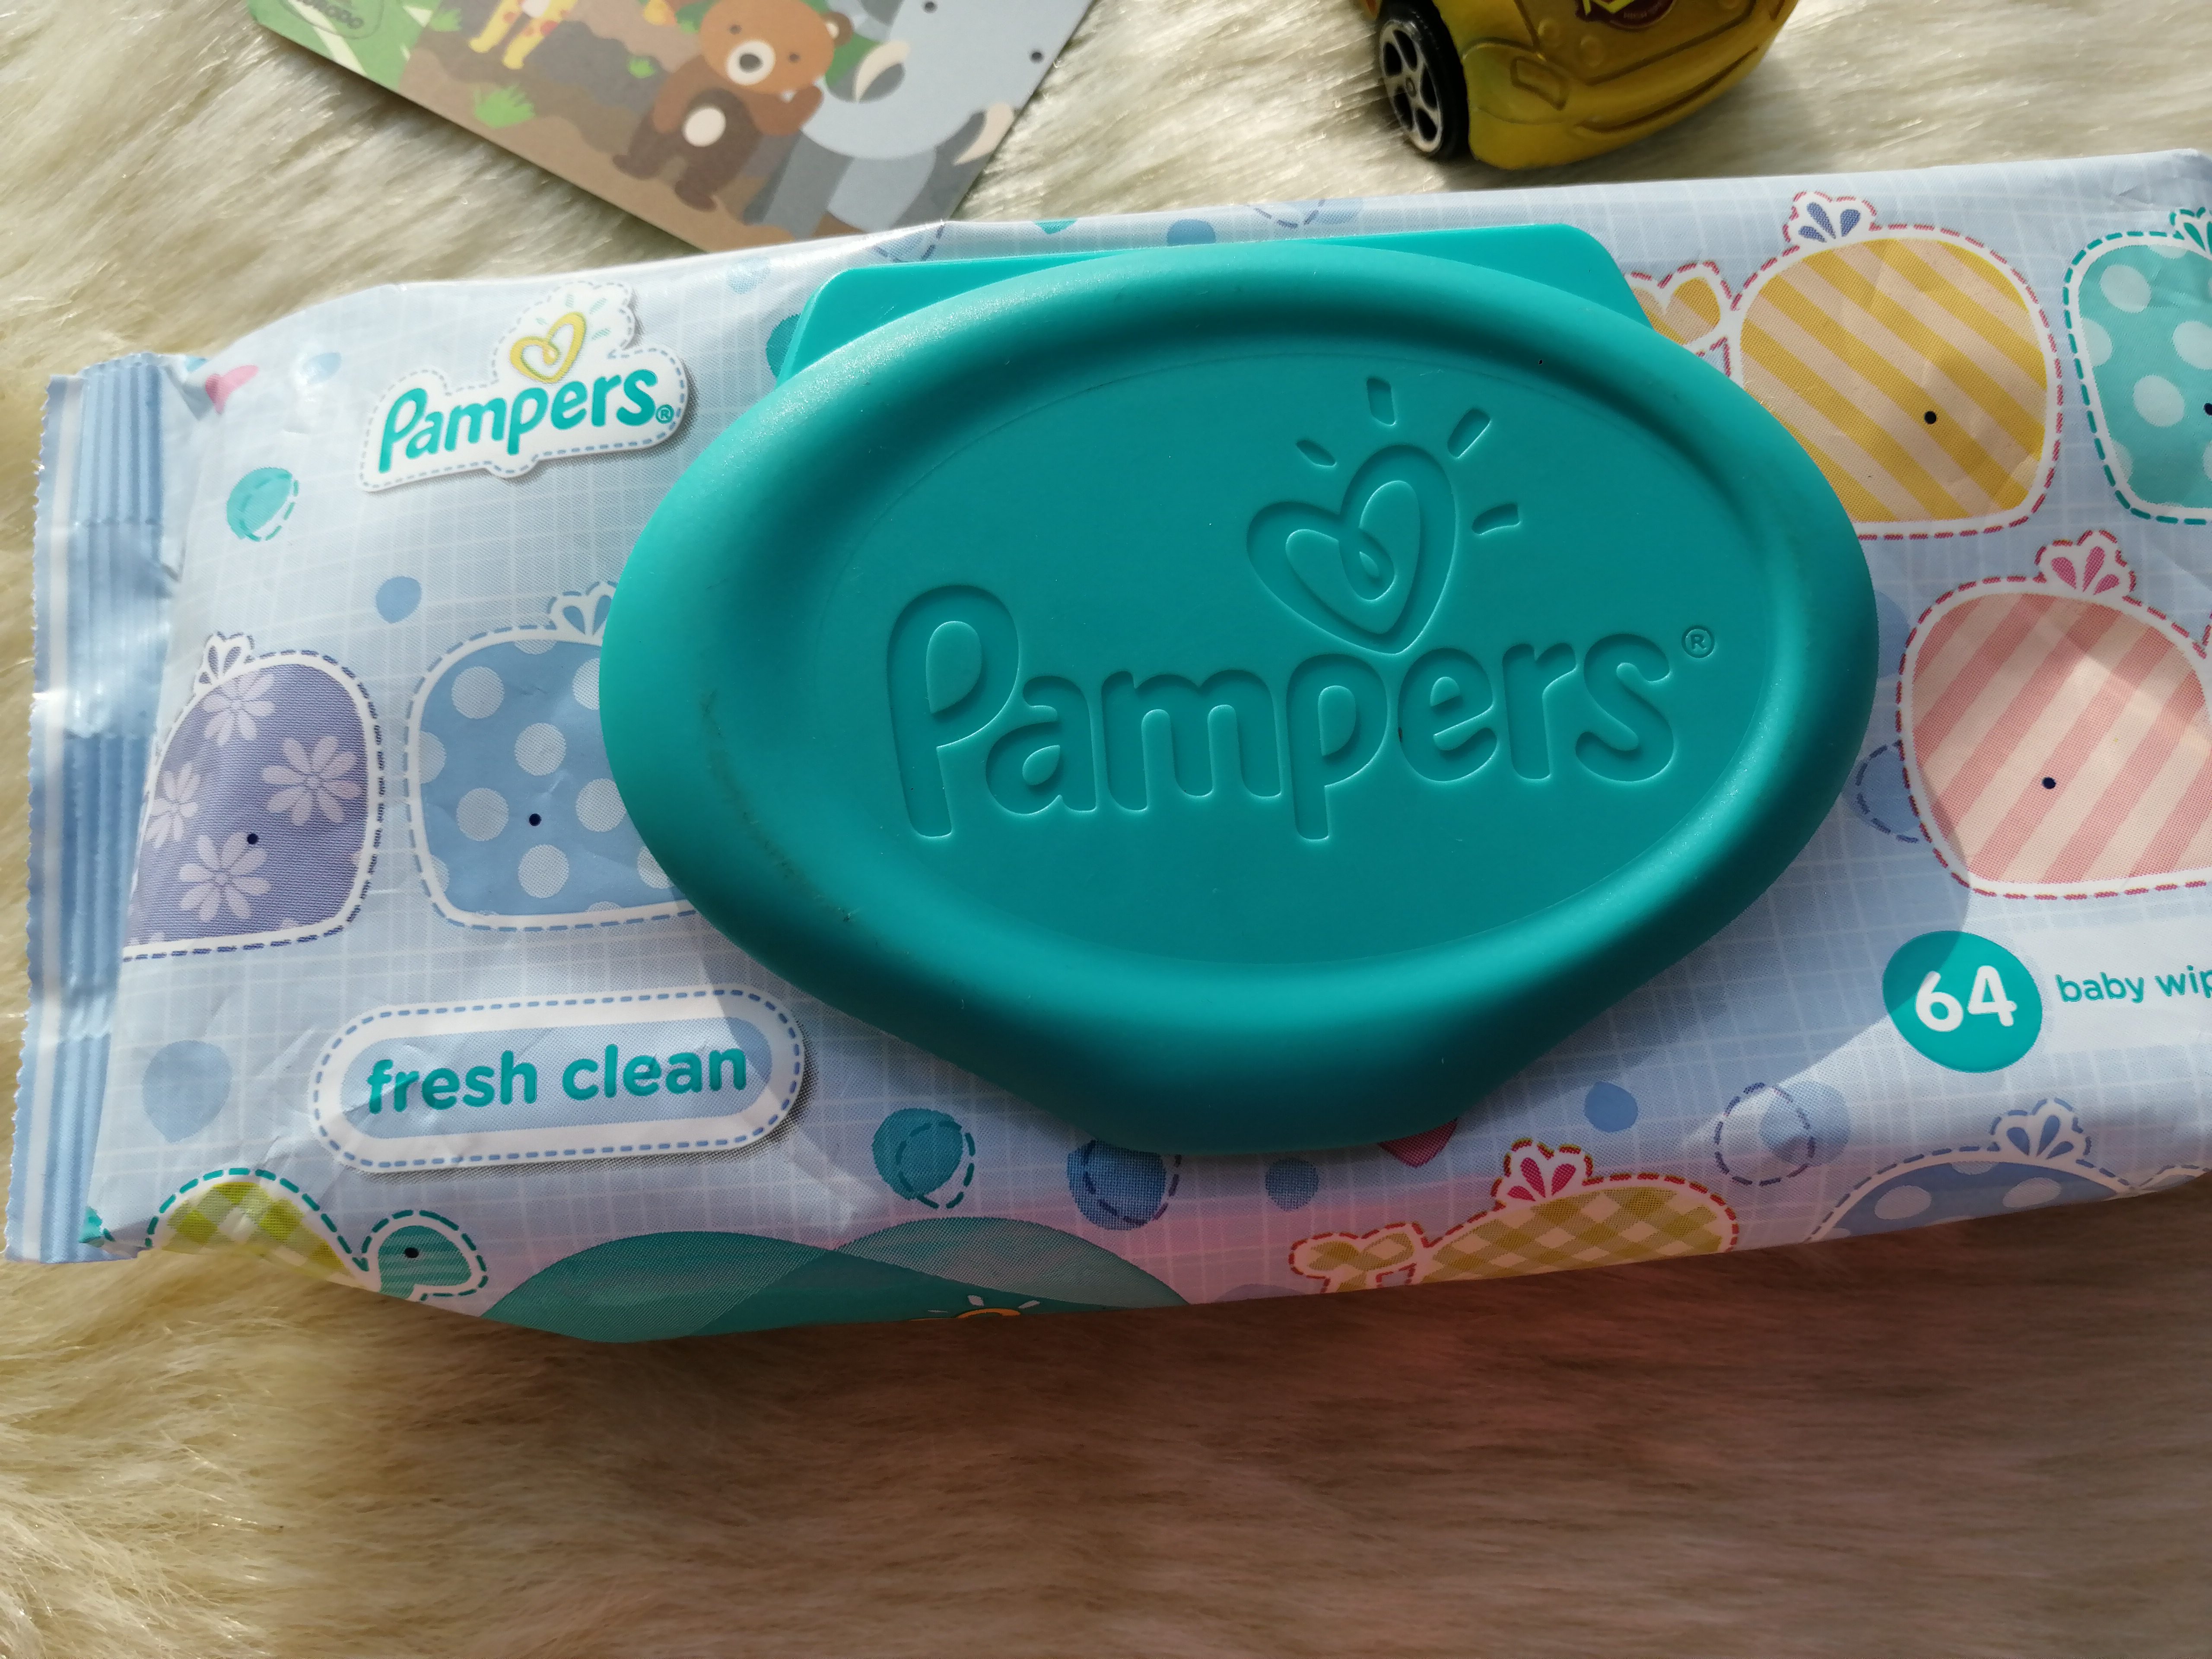 Pampers Fresh Clean Baby Wipes| Review